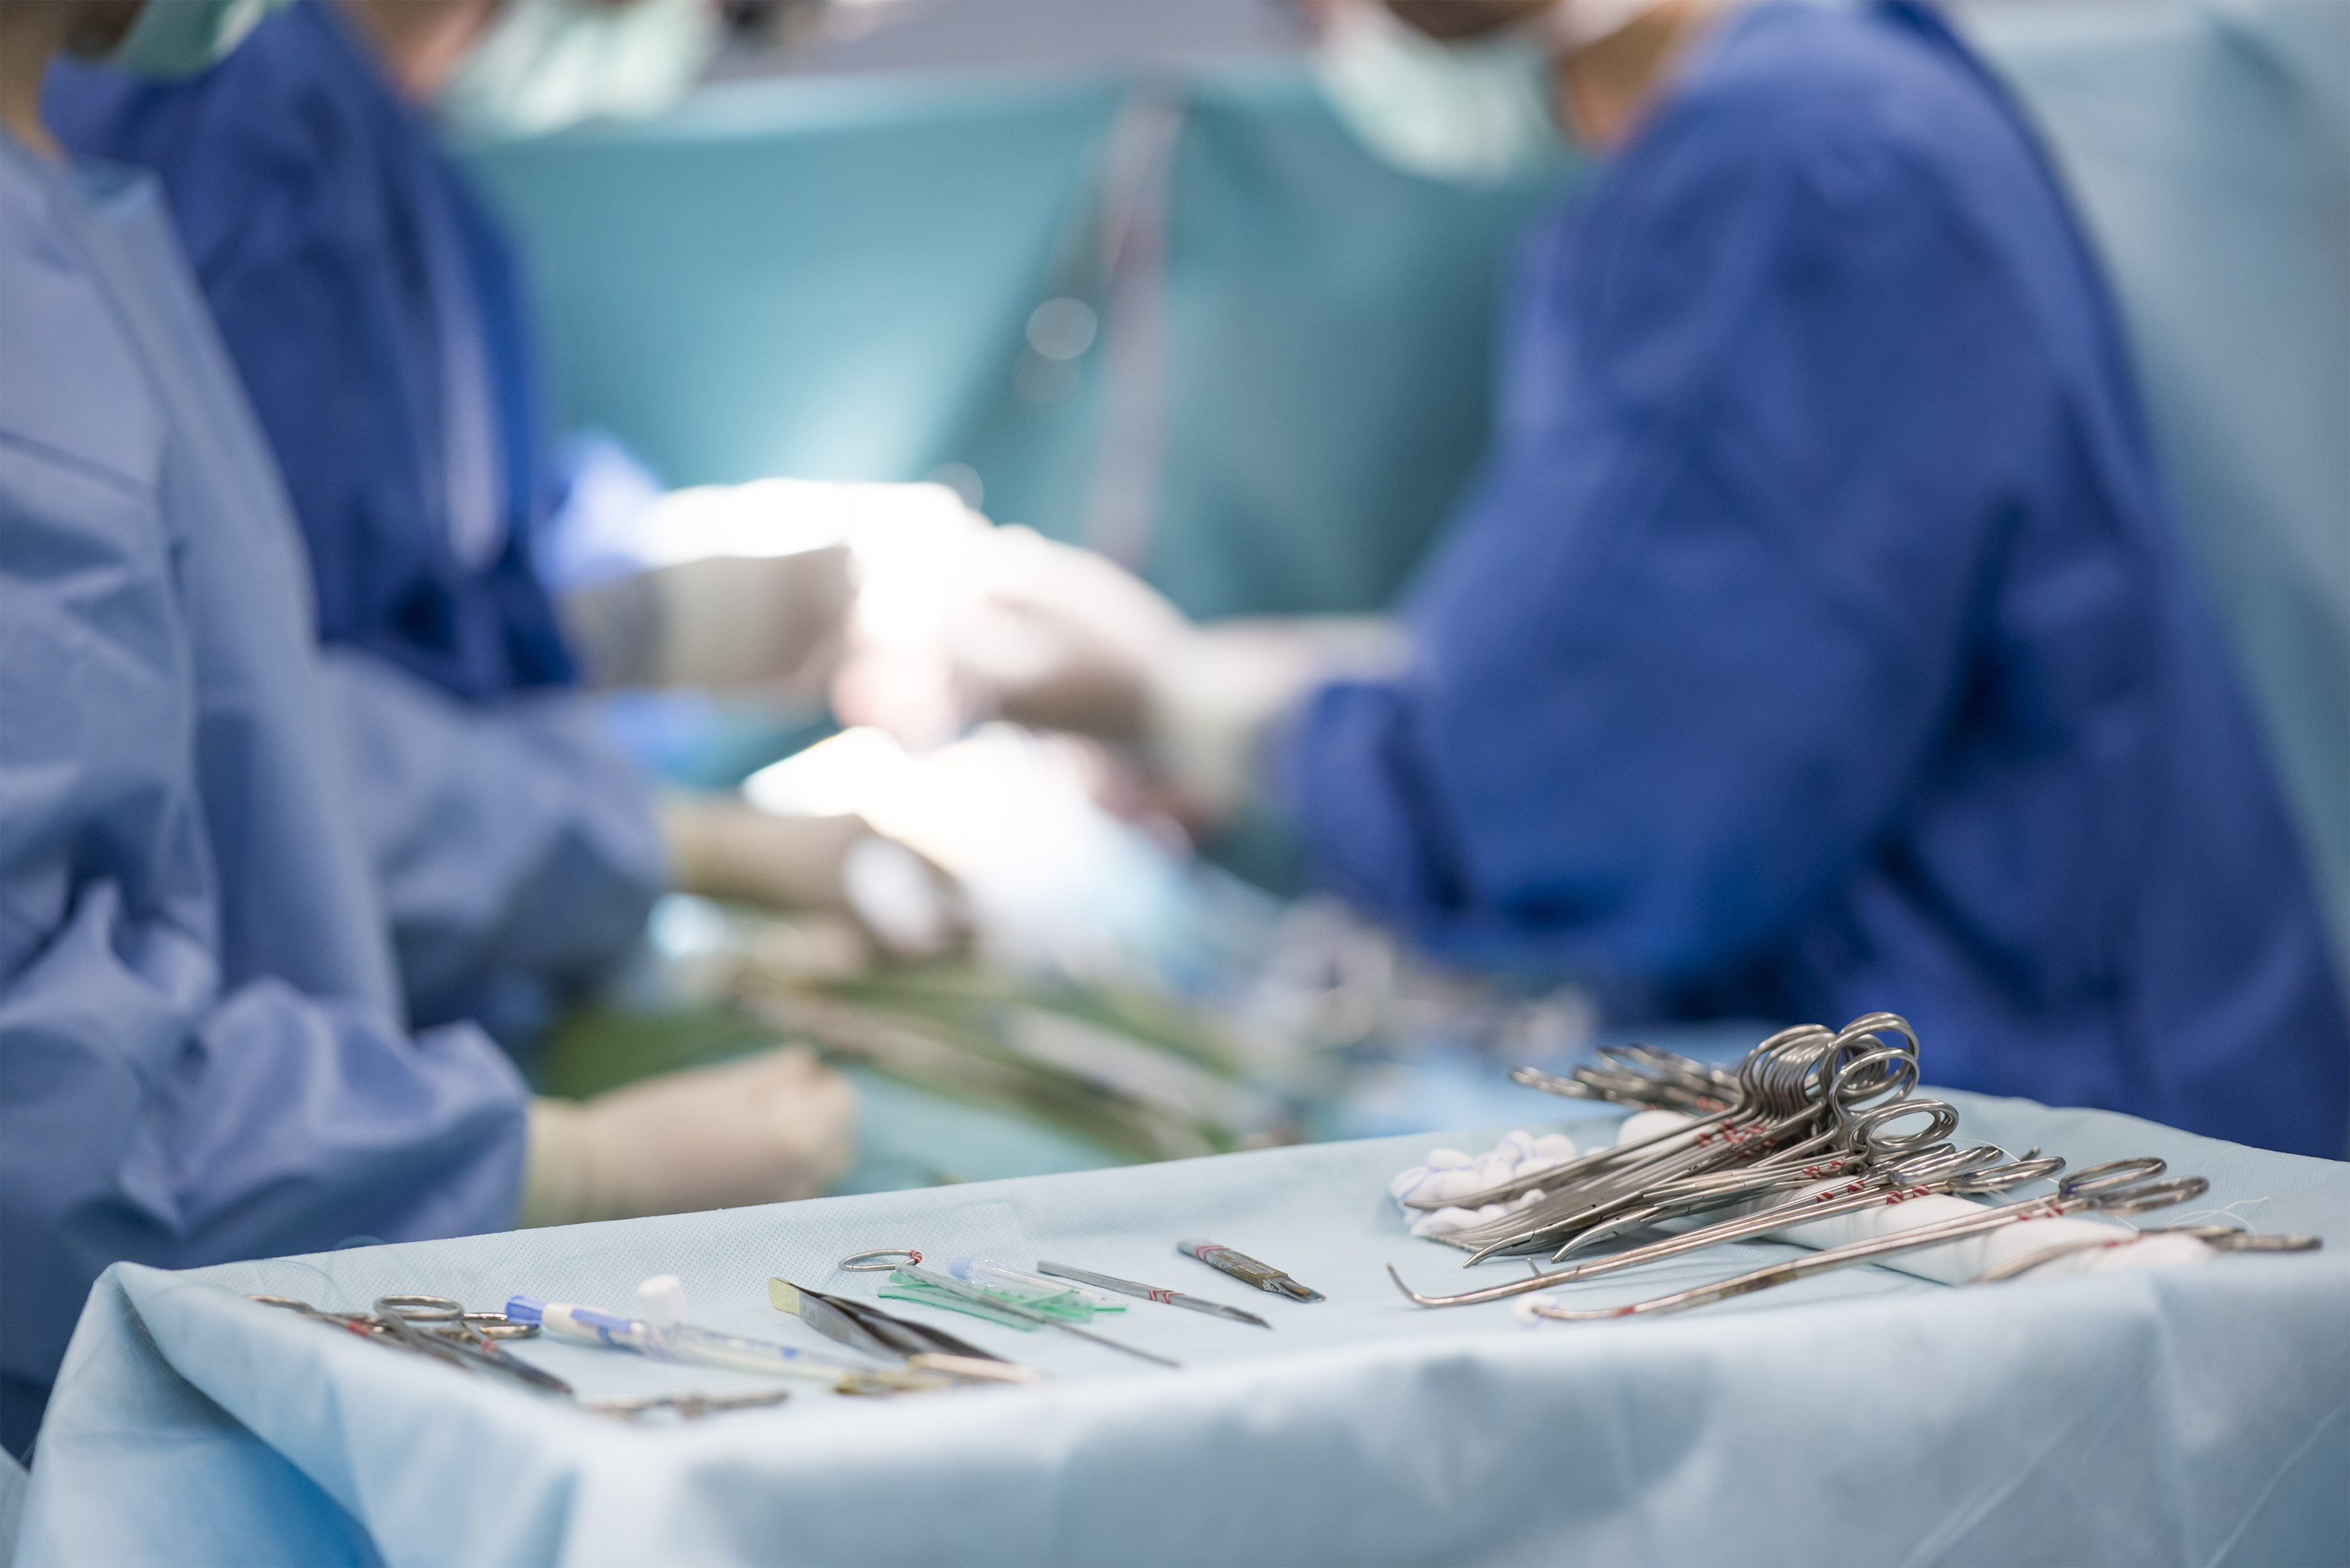 Inadequate Informed Consent Process for Orthopaedic Surgery Complicates Malpractice Defense